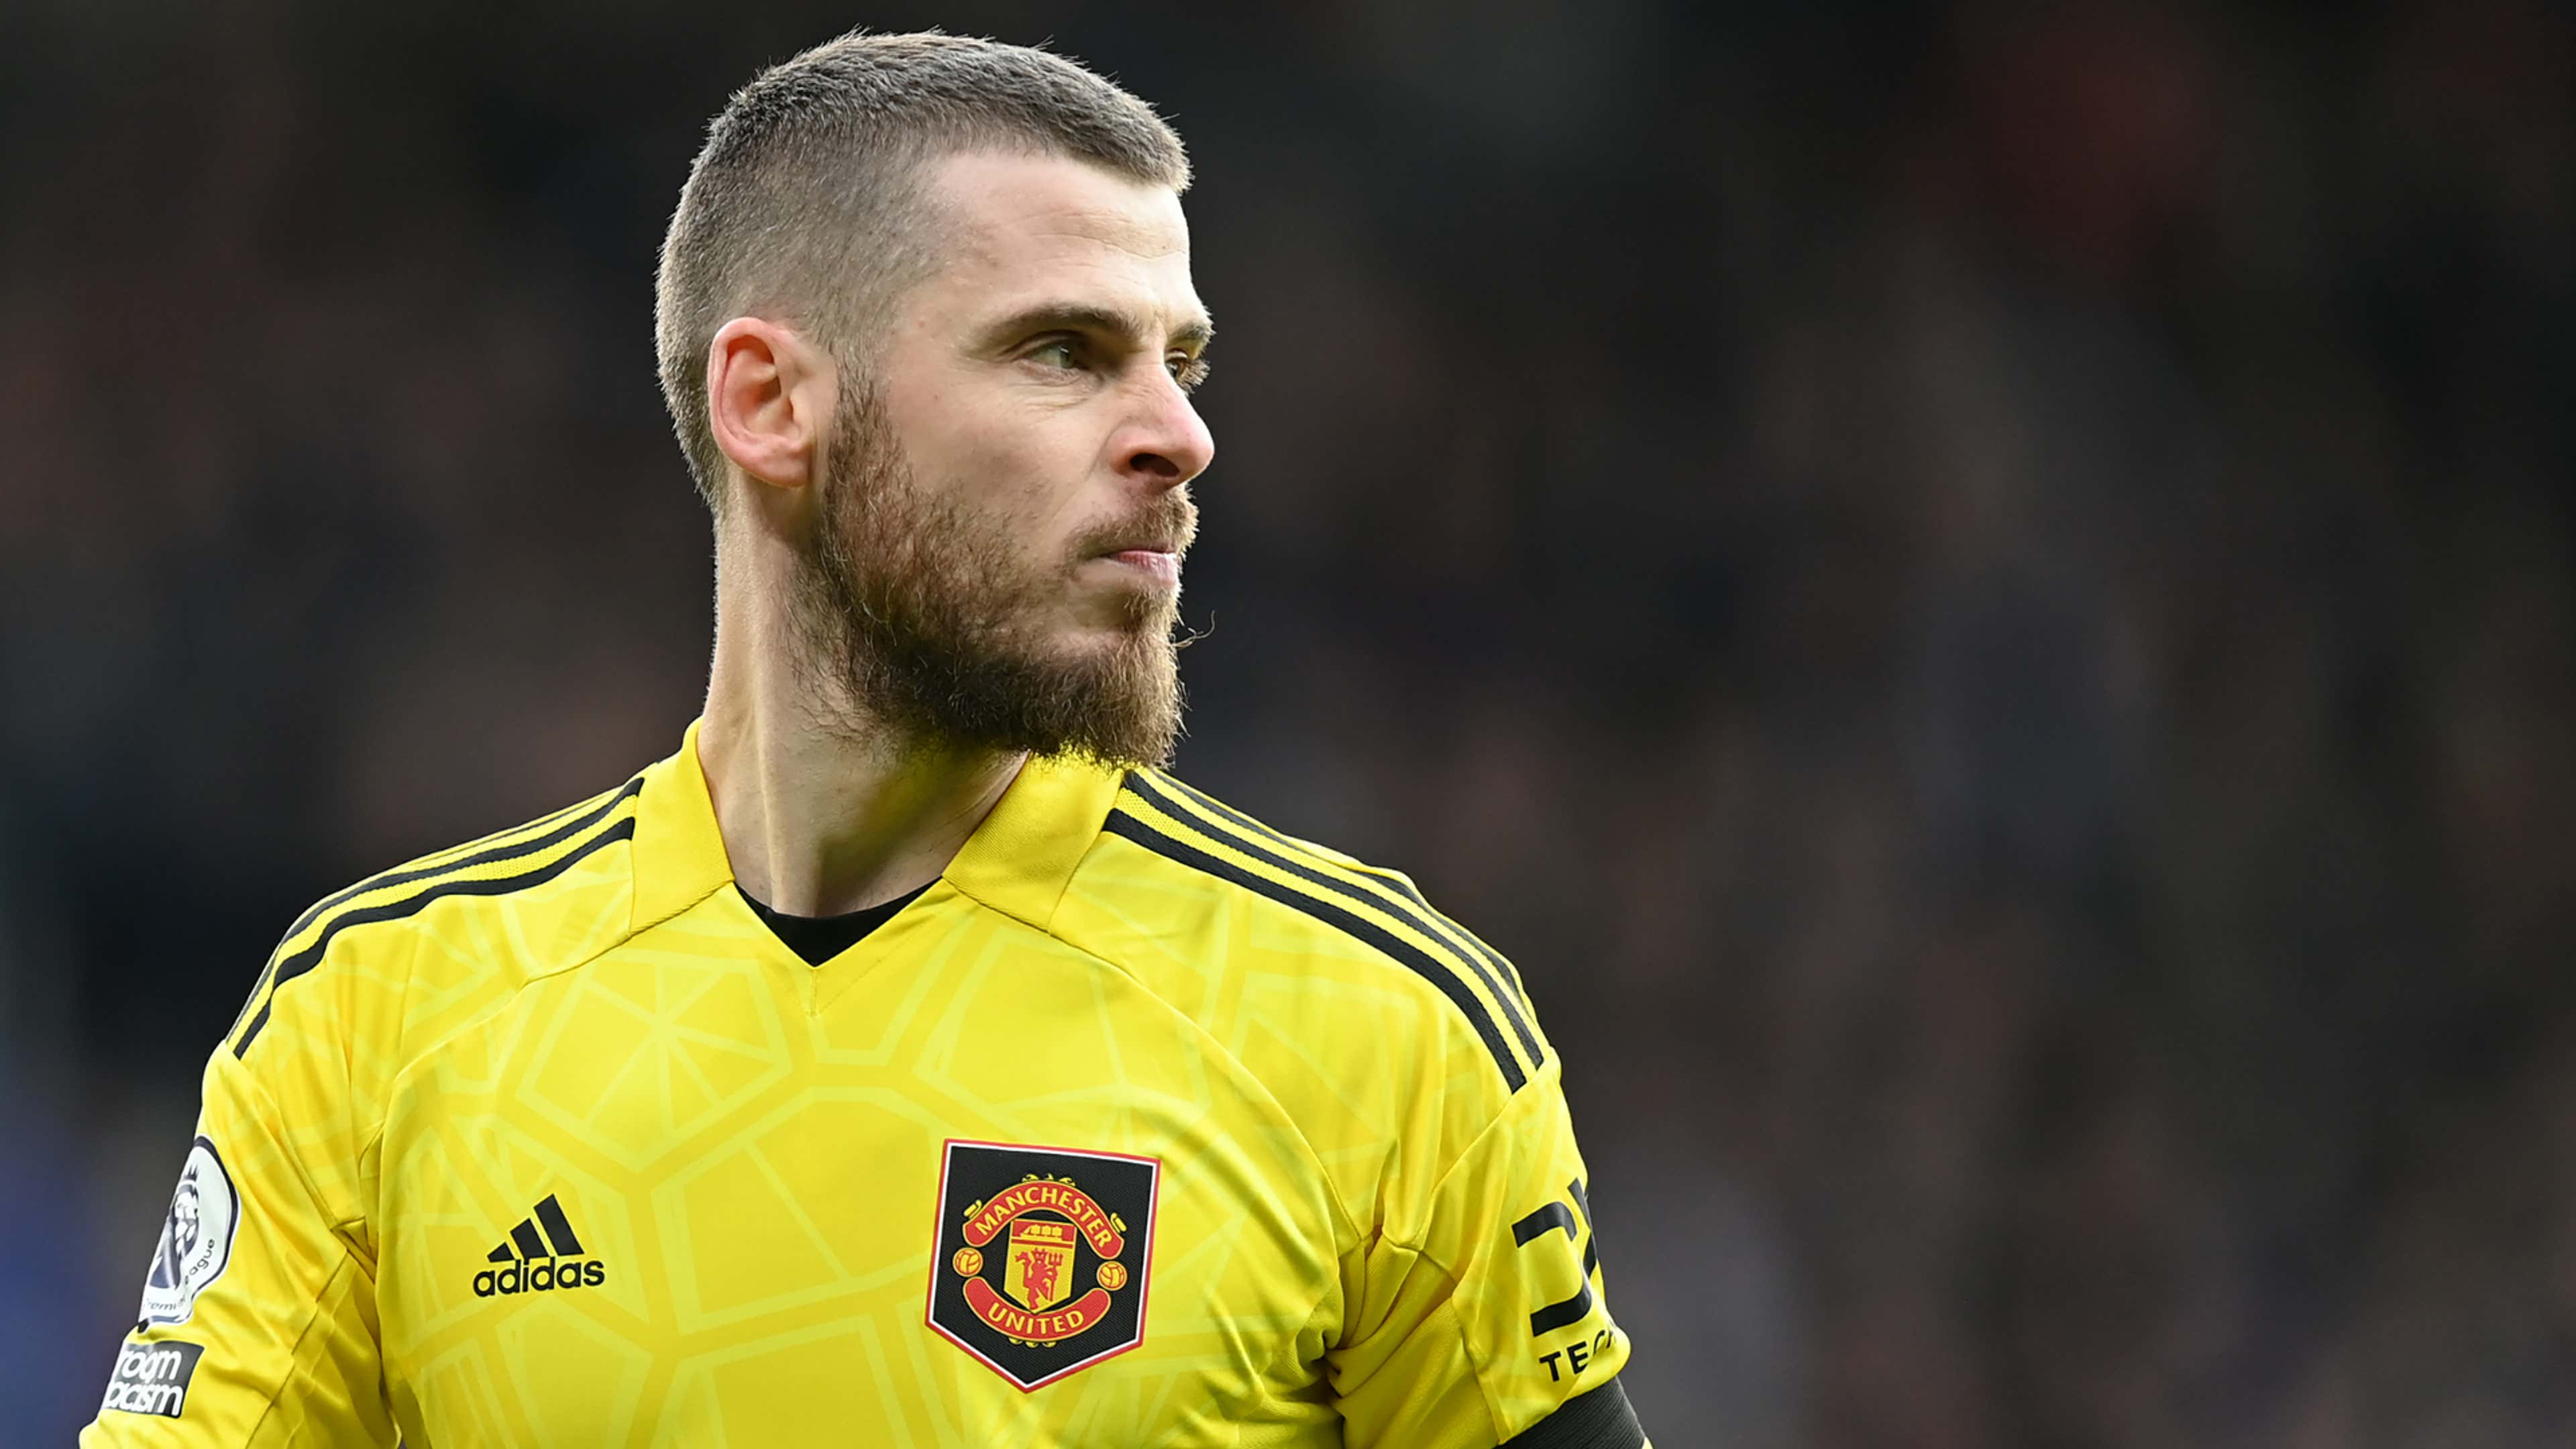 David De Gea Makes More History At Man Utd With Appearance 540 As